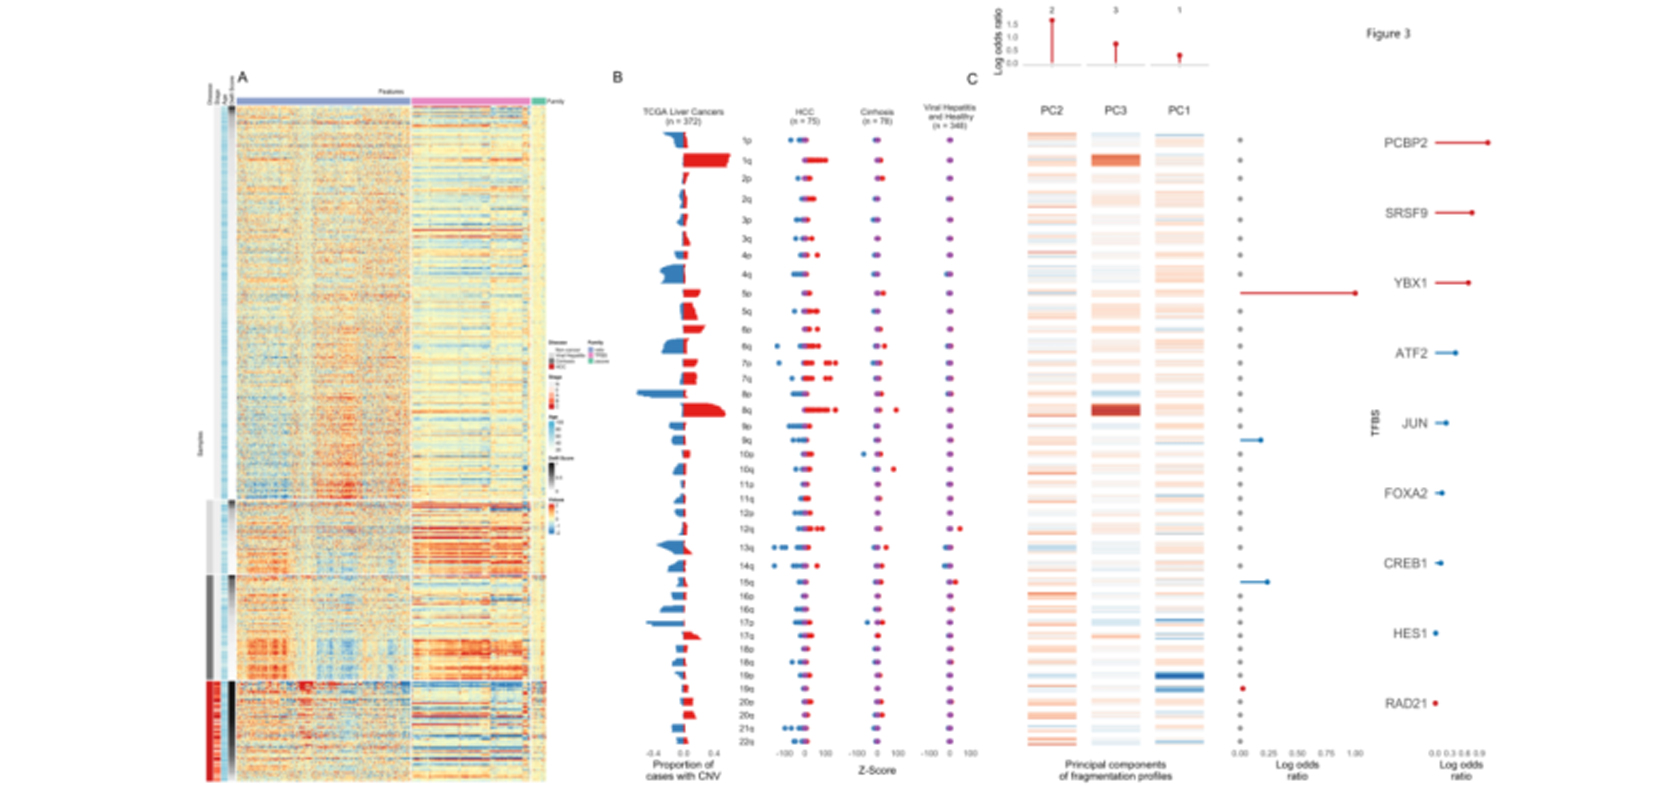 Whole Genome cfDNA Fragmentation Feature Detection Method DELFI for Liver Cancer